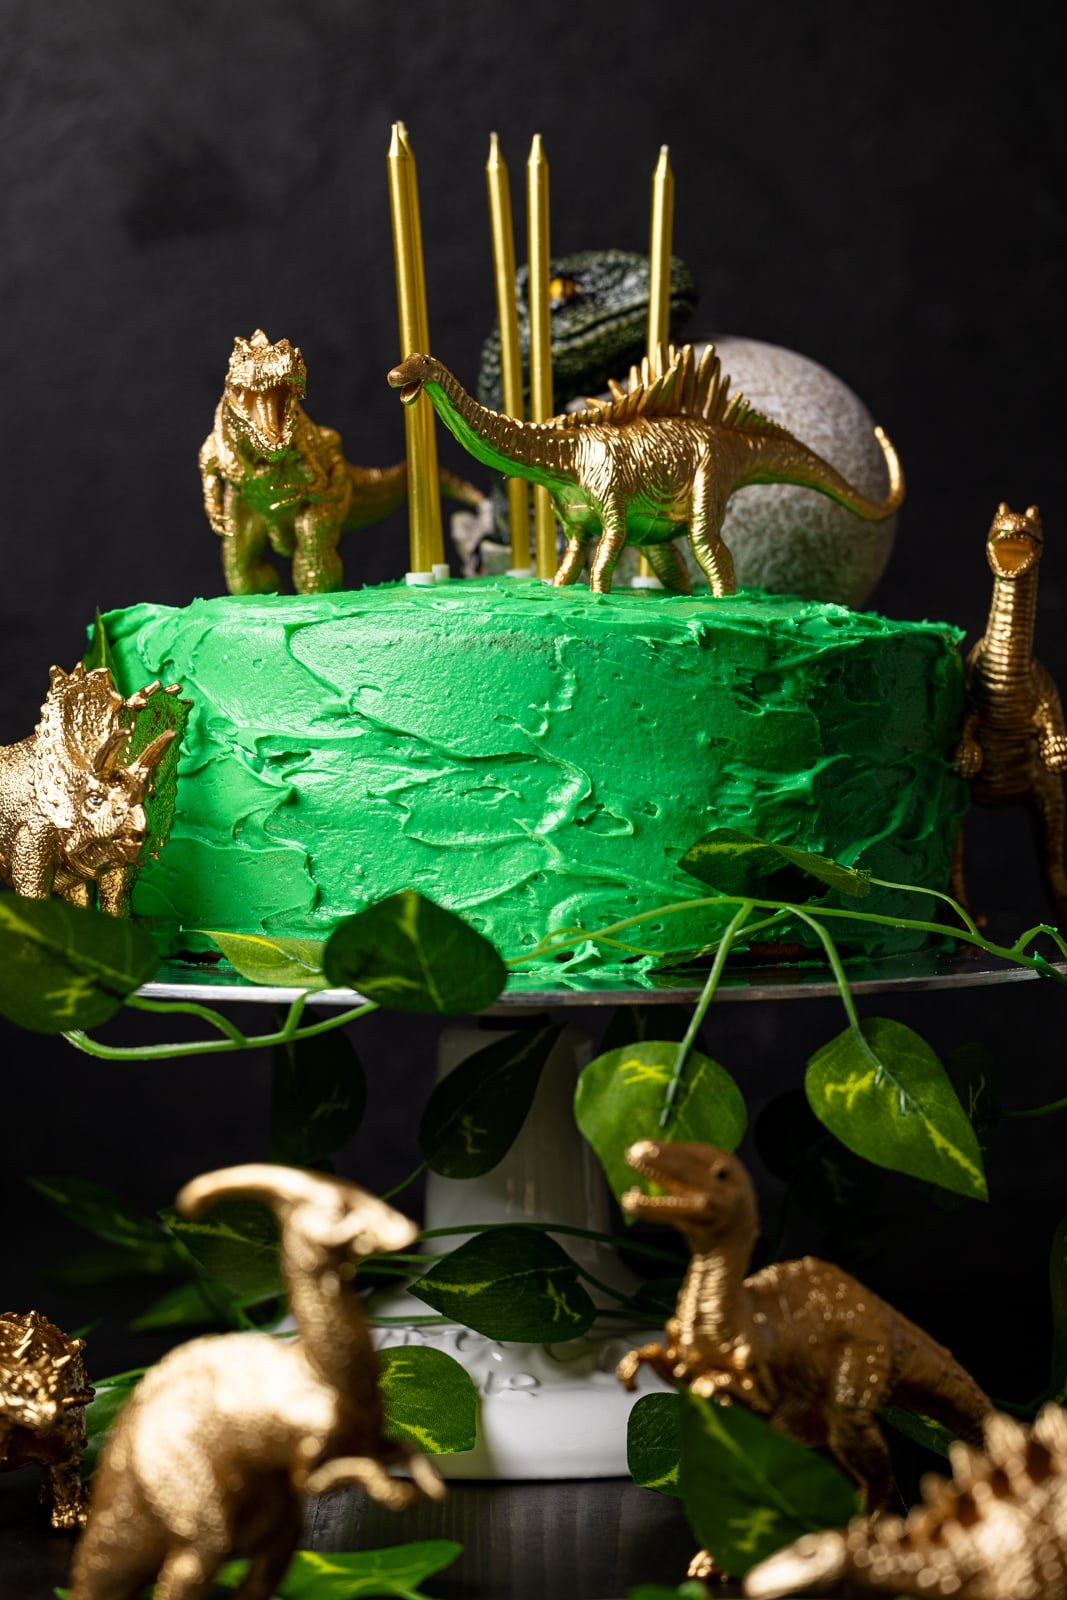 Birthday cake with green frosting and candles with toy dinosaurs on top and surrounding it on a black table.